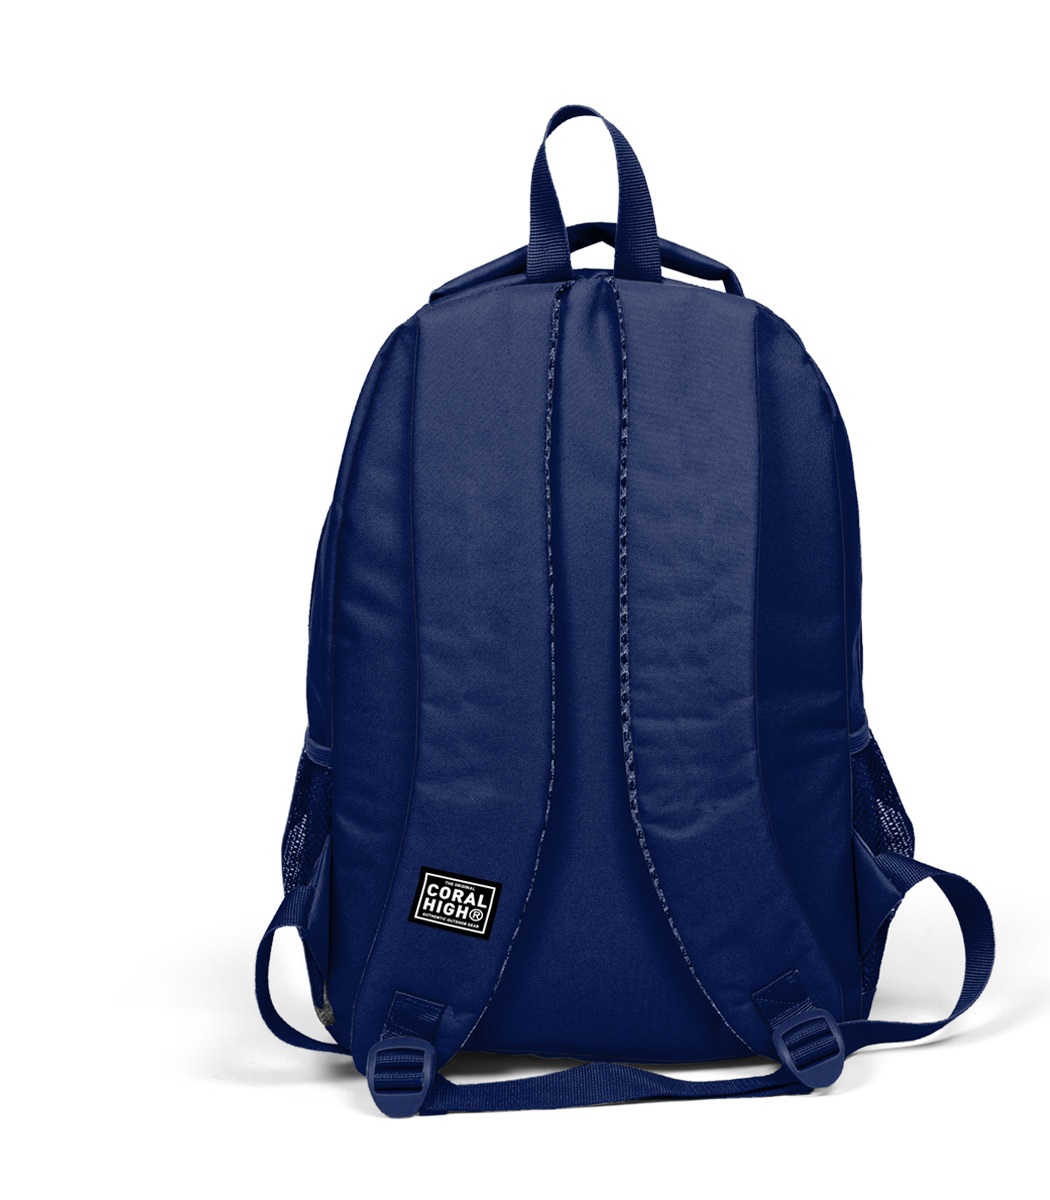 Coral High Kids Three Compartment School Backpack - Navy Blue